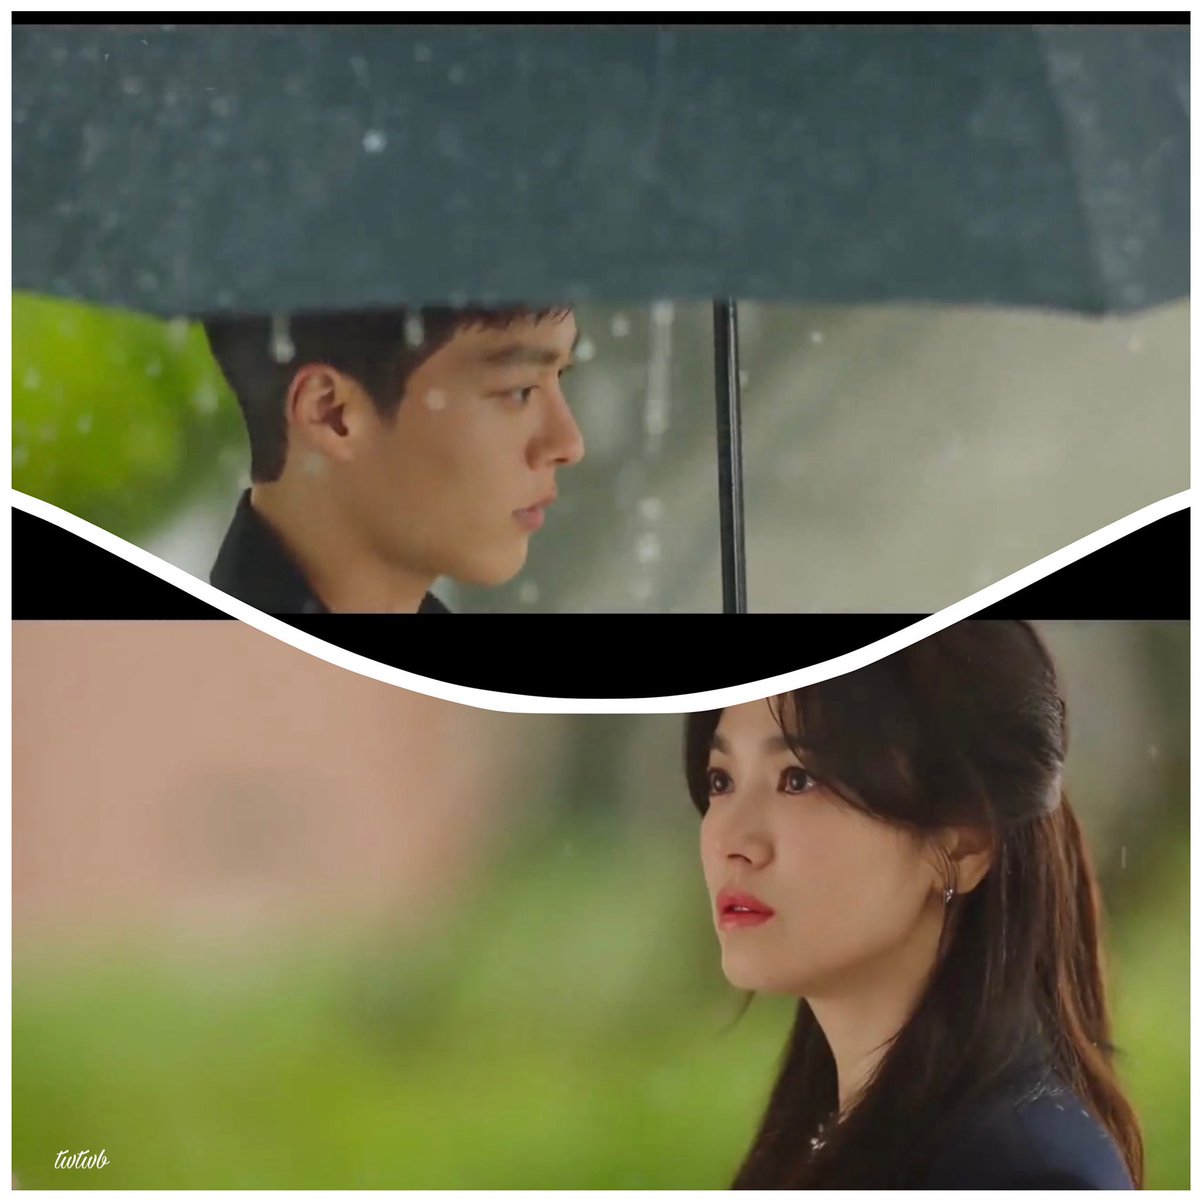 To me, part of what makes #NWBU different from other K-dramas is how the love journey of the characters played by #SongHyeKyo & #JangKiYong is depicted with much more maturity & relatability. A drama for those looking for a more understated portrayal of love and separation.